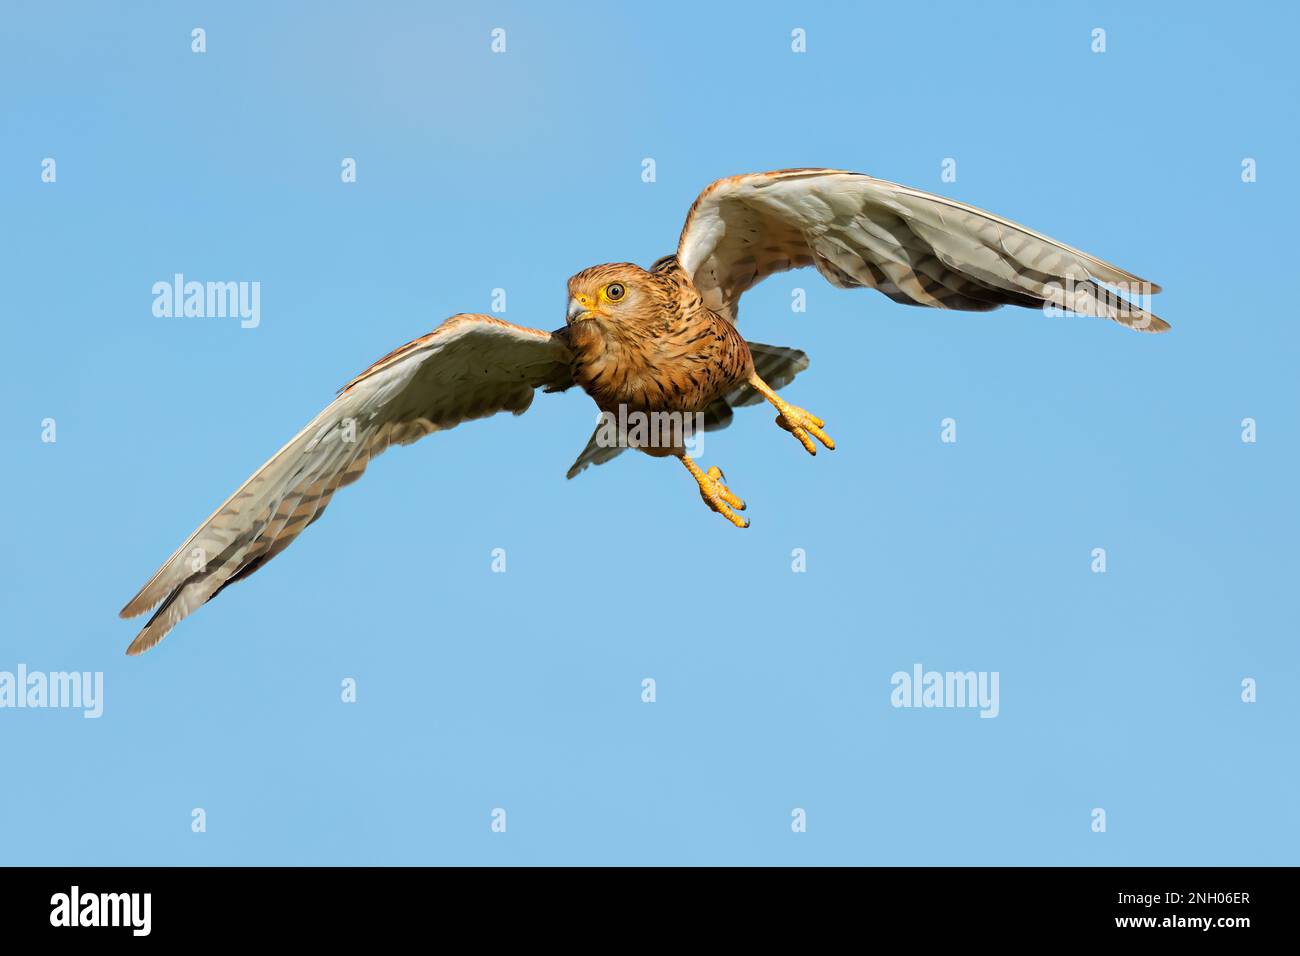 A greater kestrel (Falco rupicoloides) in flight with open wings, South Africa Stock Photo